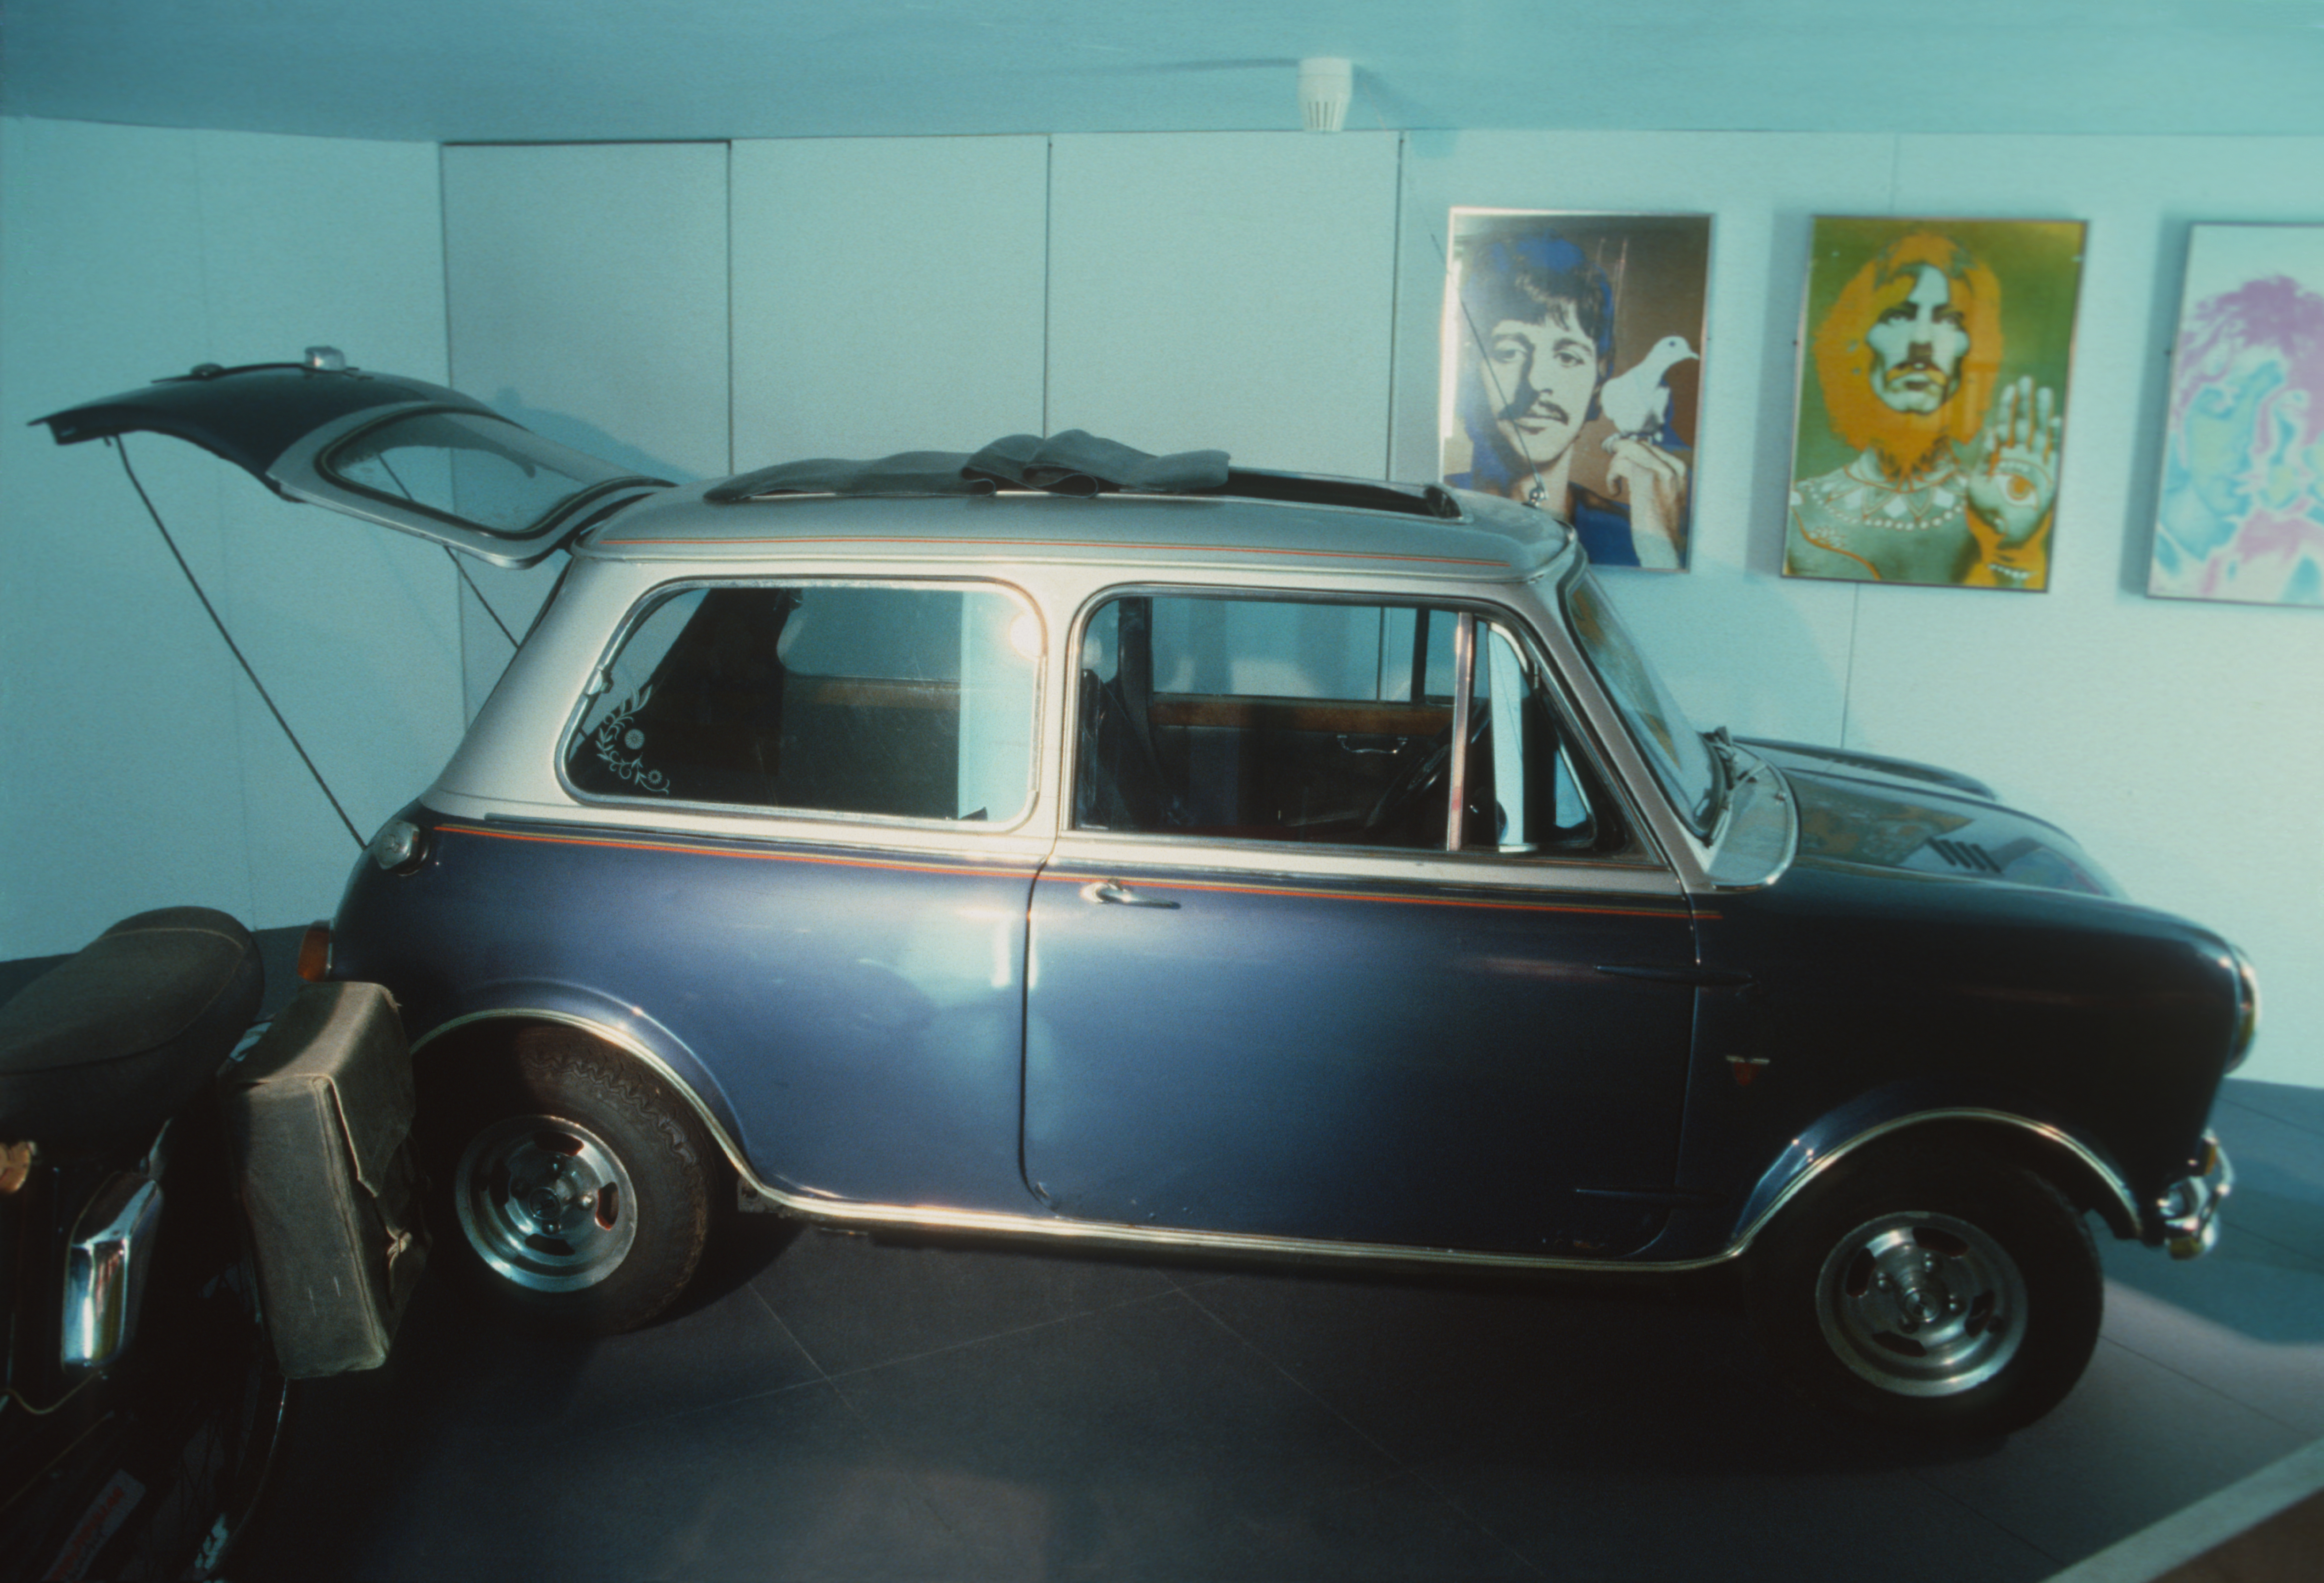 Ringo's Mini was specially modified to accommodate his drum kit